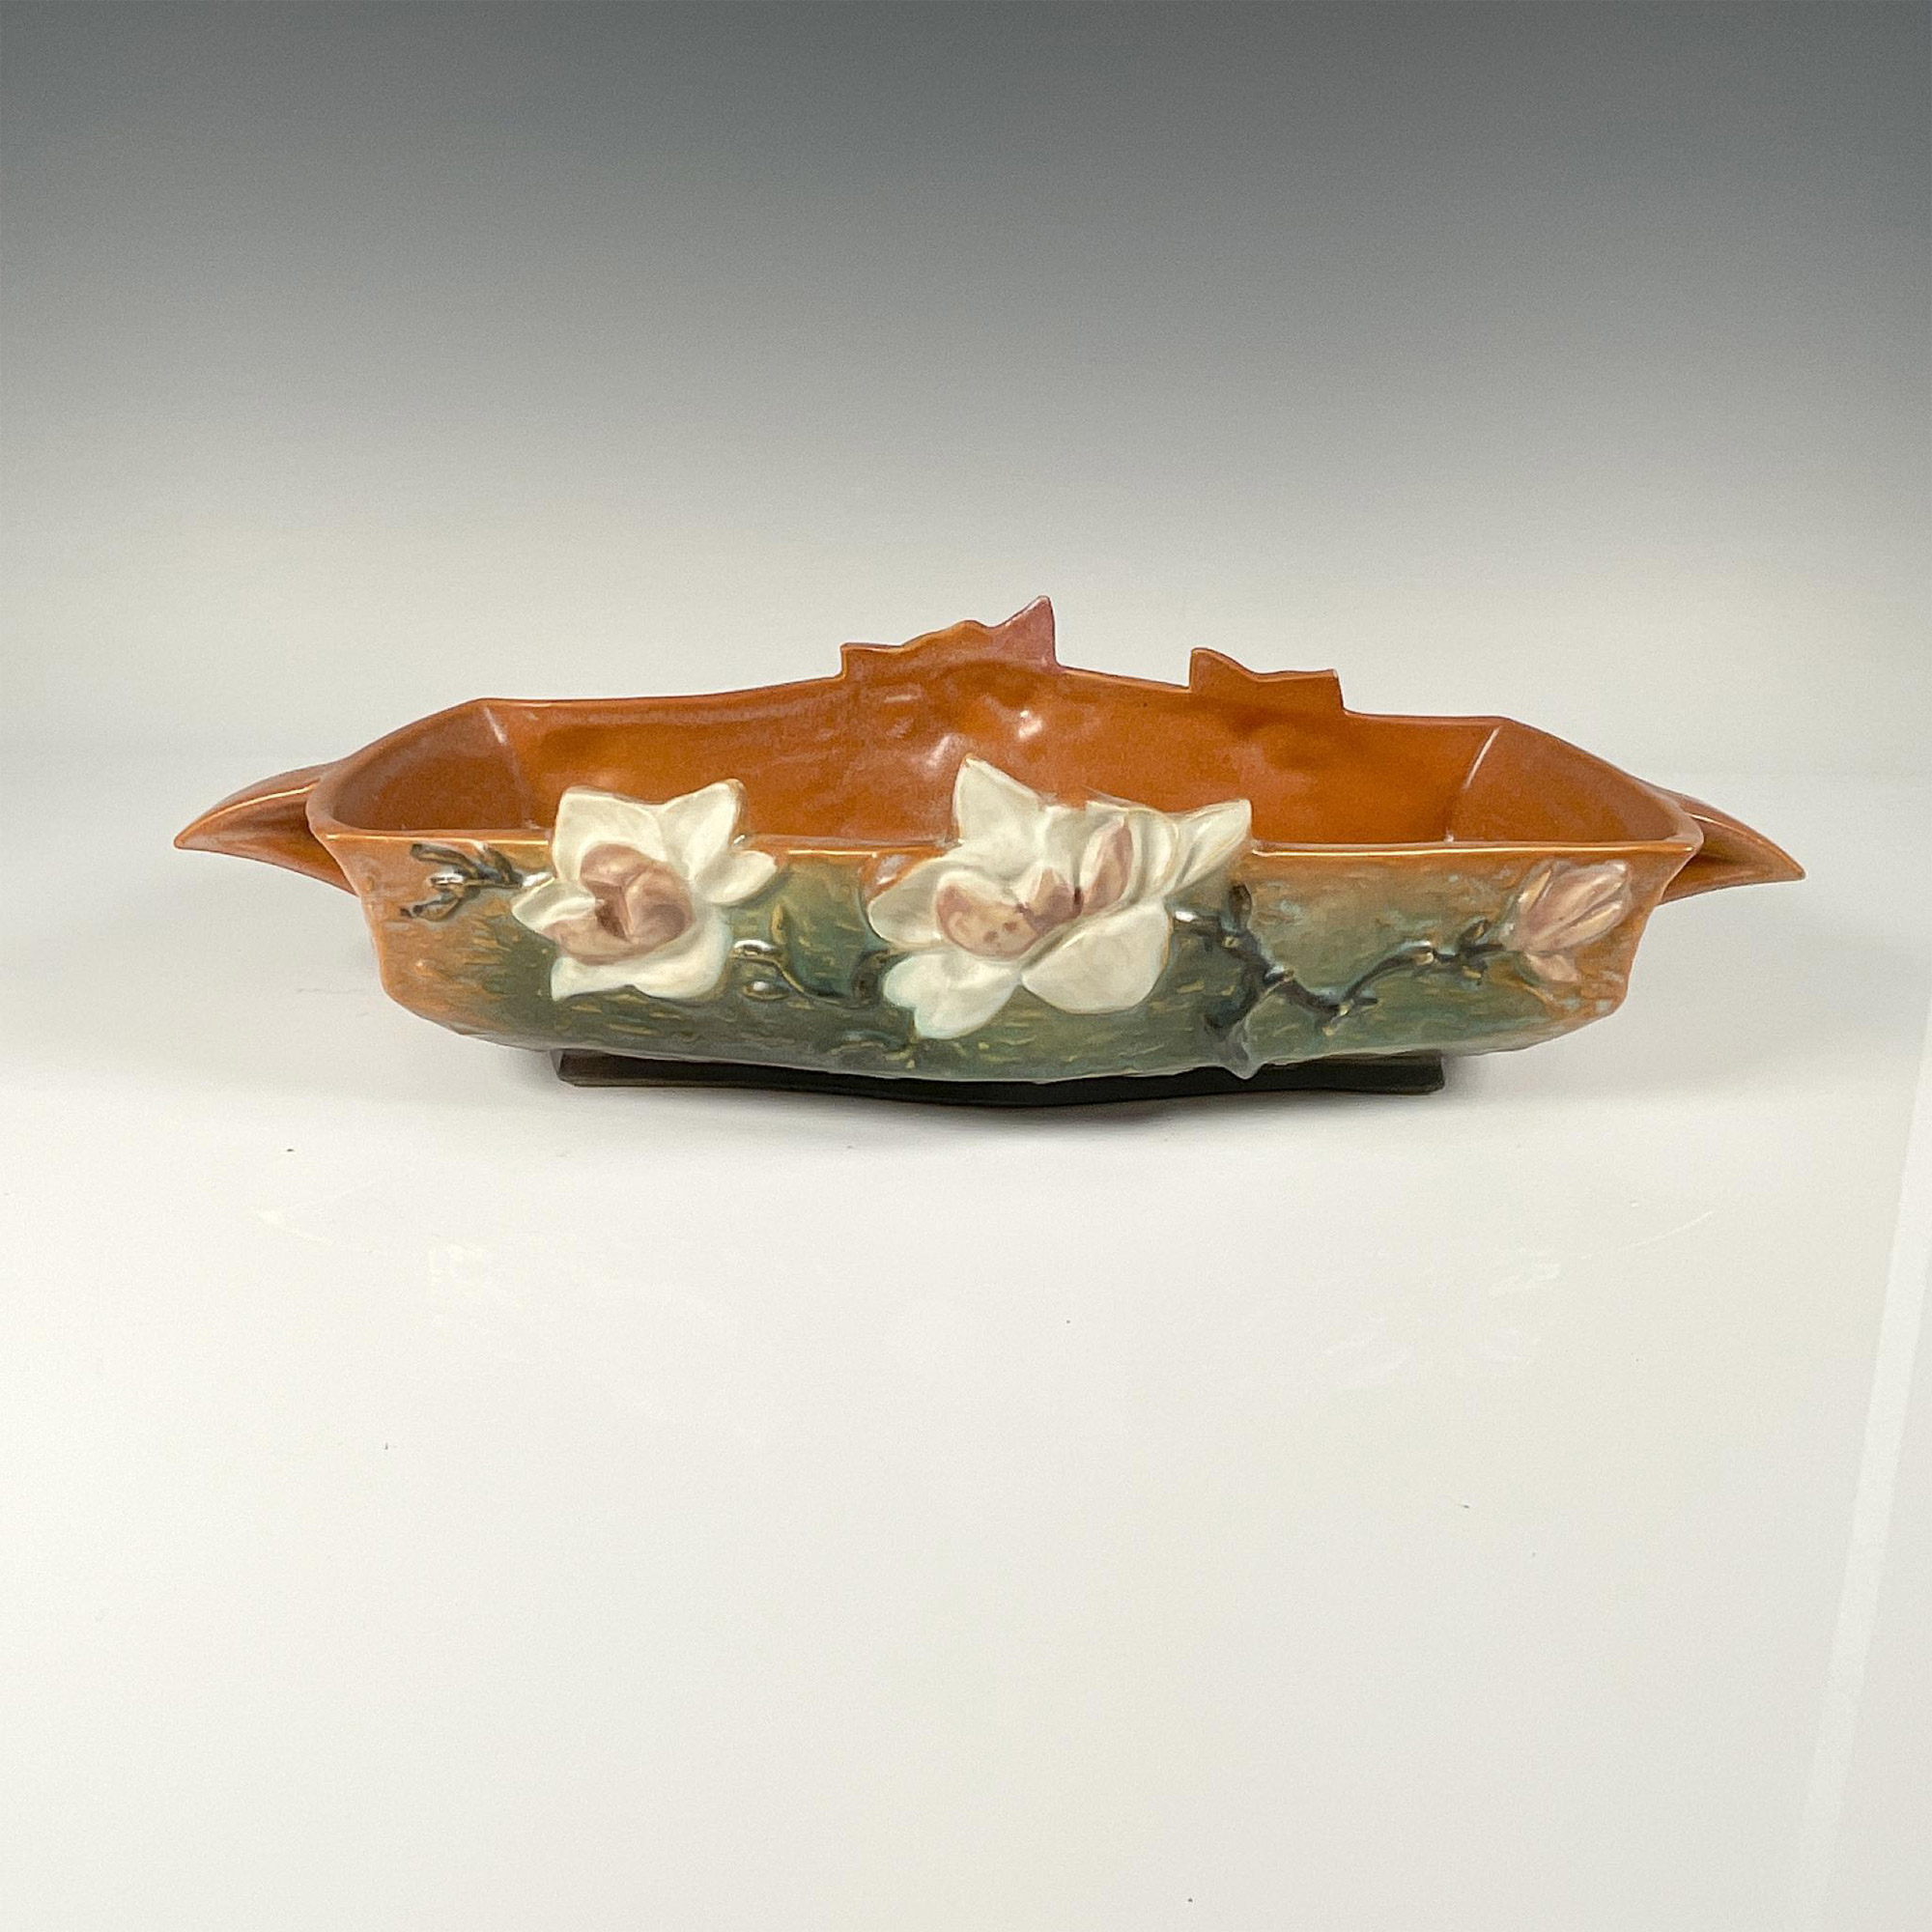 Roseville Pottery, Brown Magnolia Centerpiece 451 - Image 2 of 3